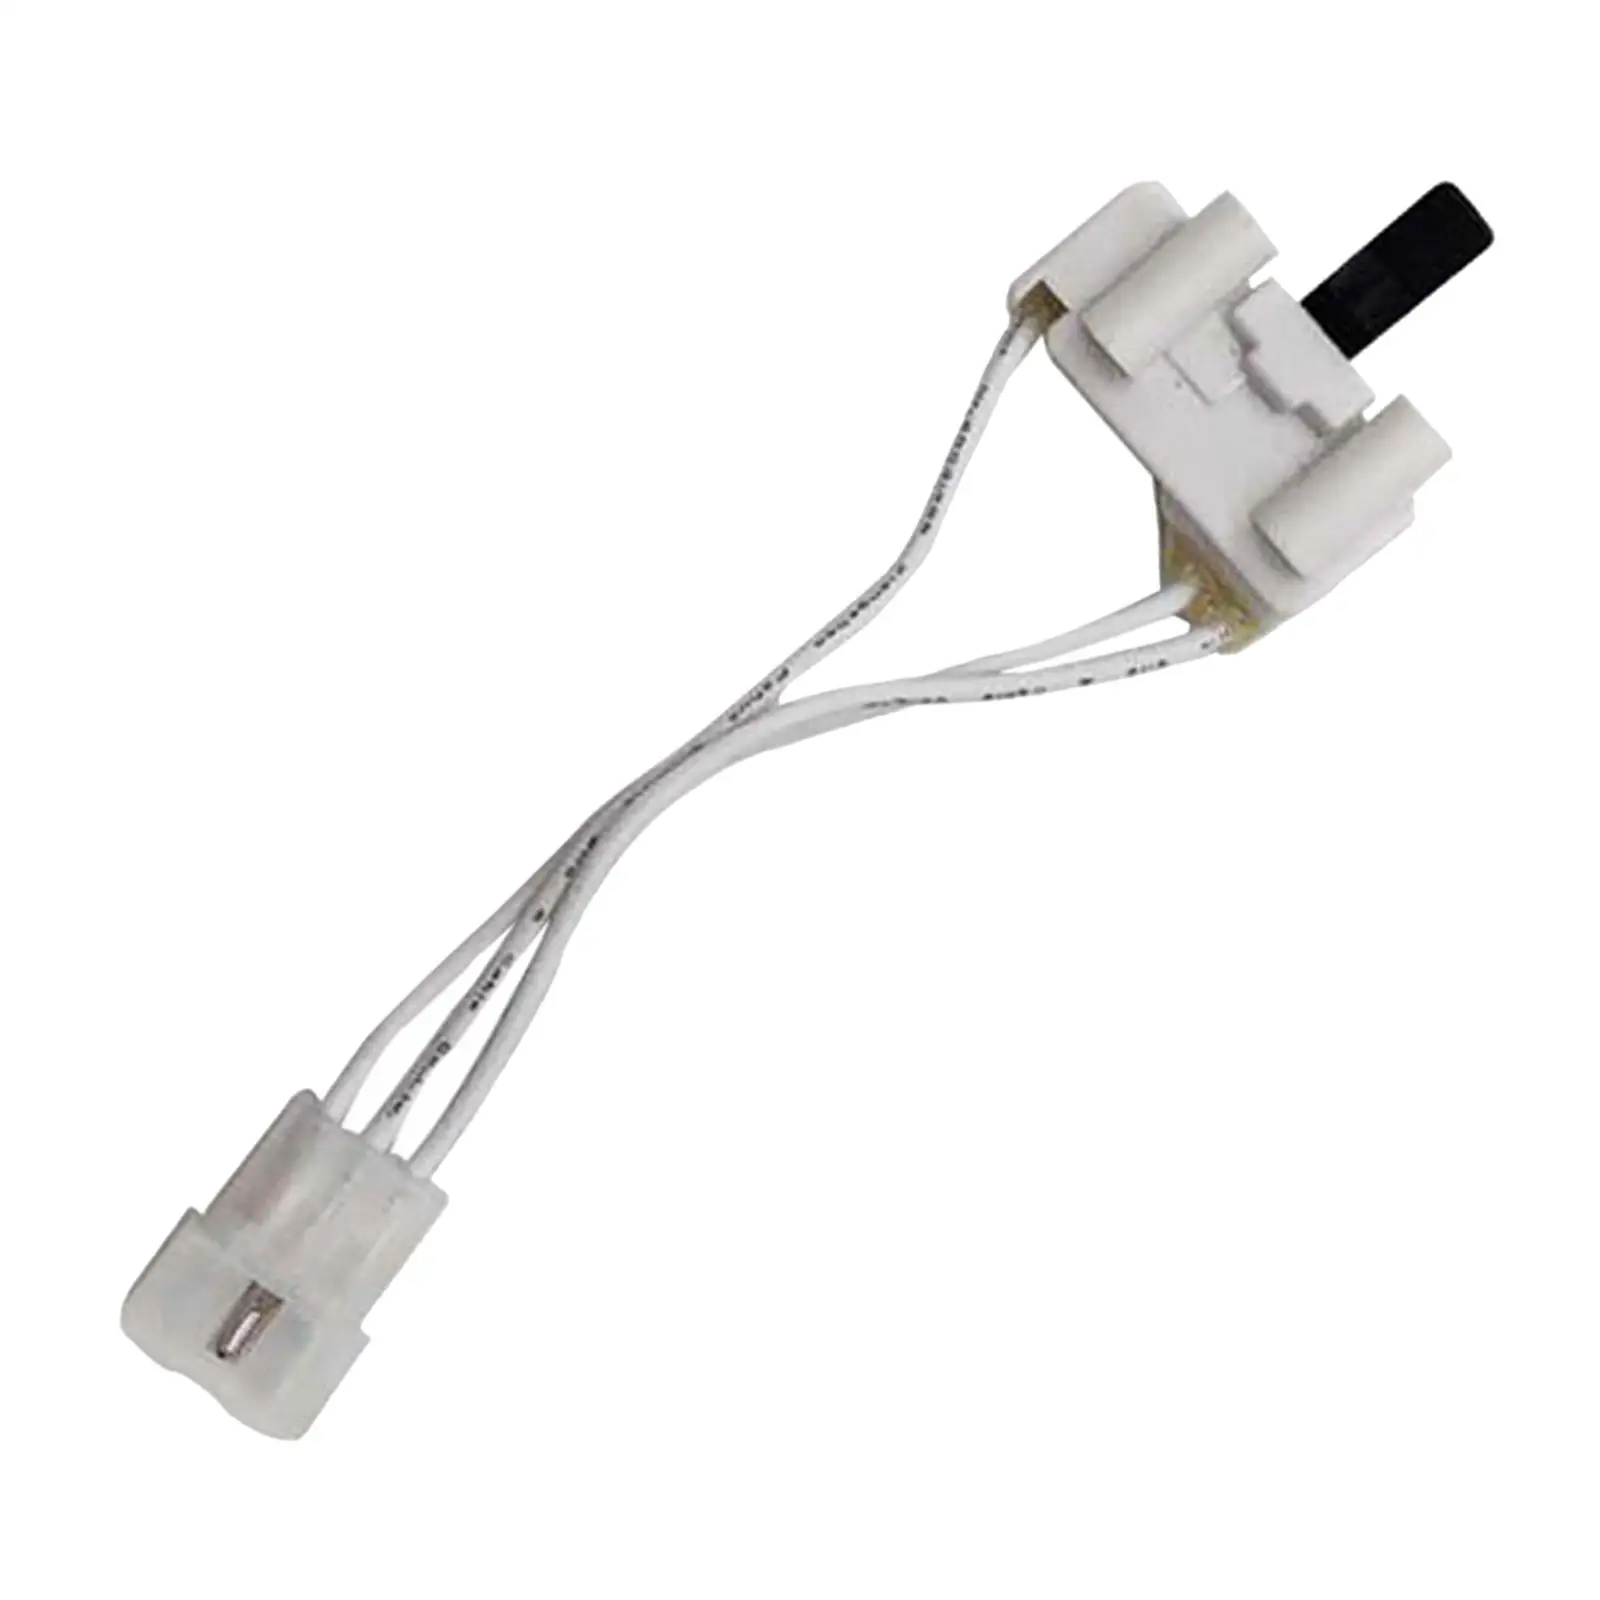 Washing Machine Switch Accessory Replaceable Reusable Durable Conductive Accs Washer Switch Parts for 3406107 Washing Machine